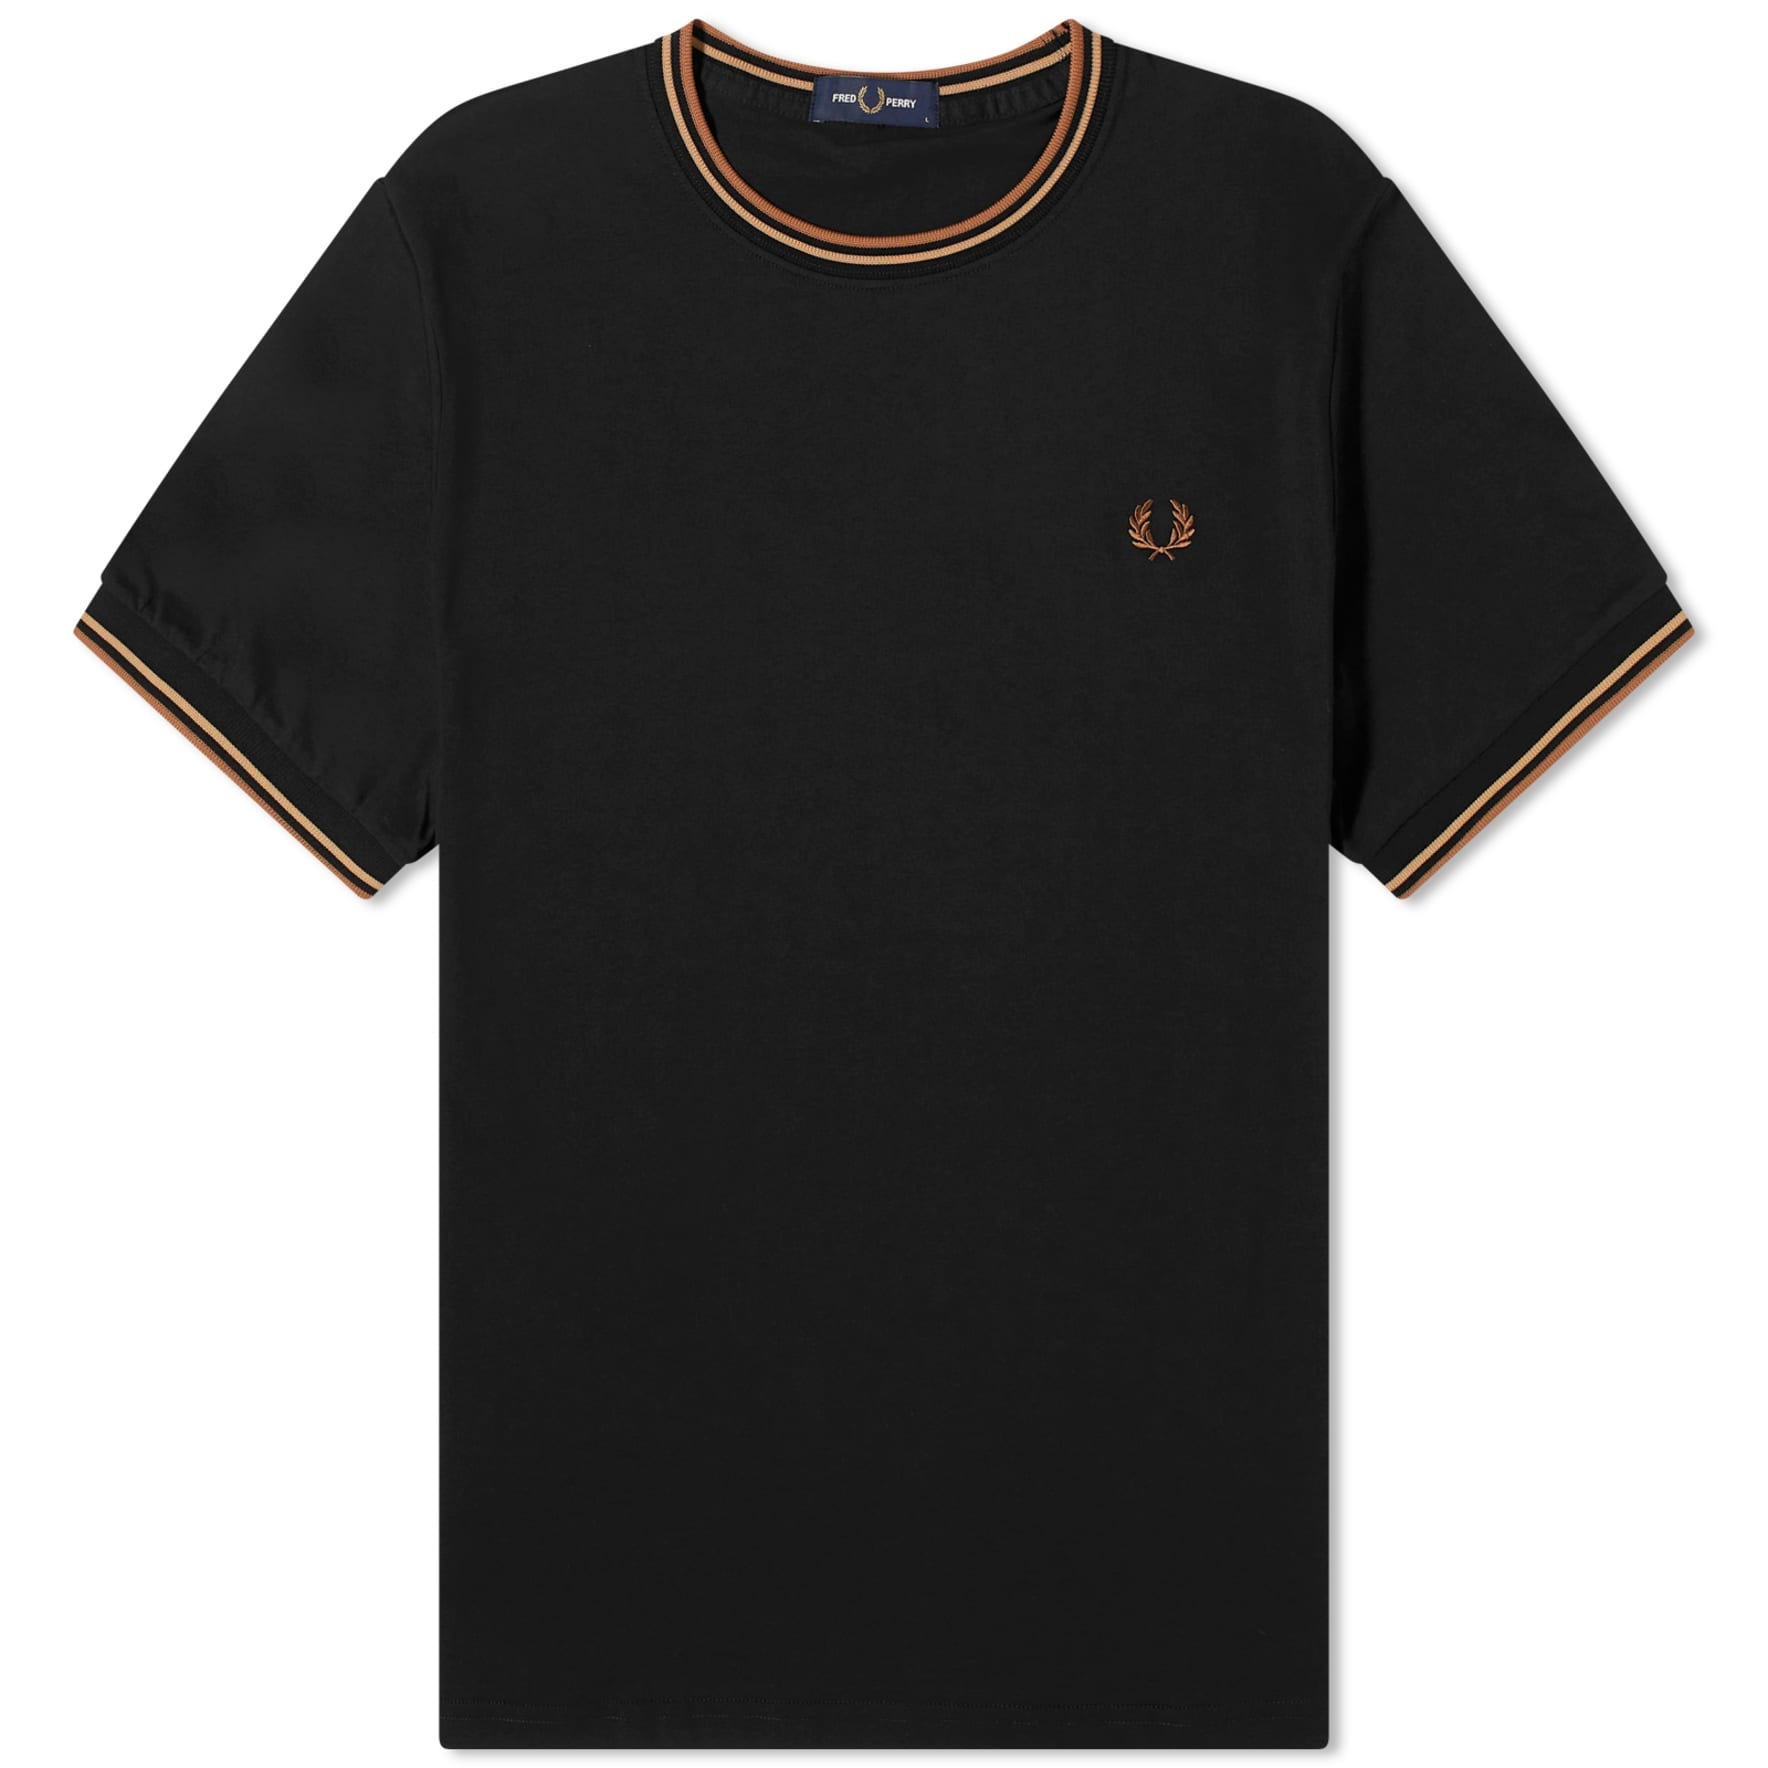 Футболка Fred Perry Twin Tipped, черный футболка поло fred perry twin tipped белый